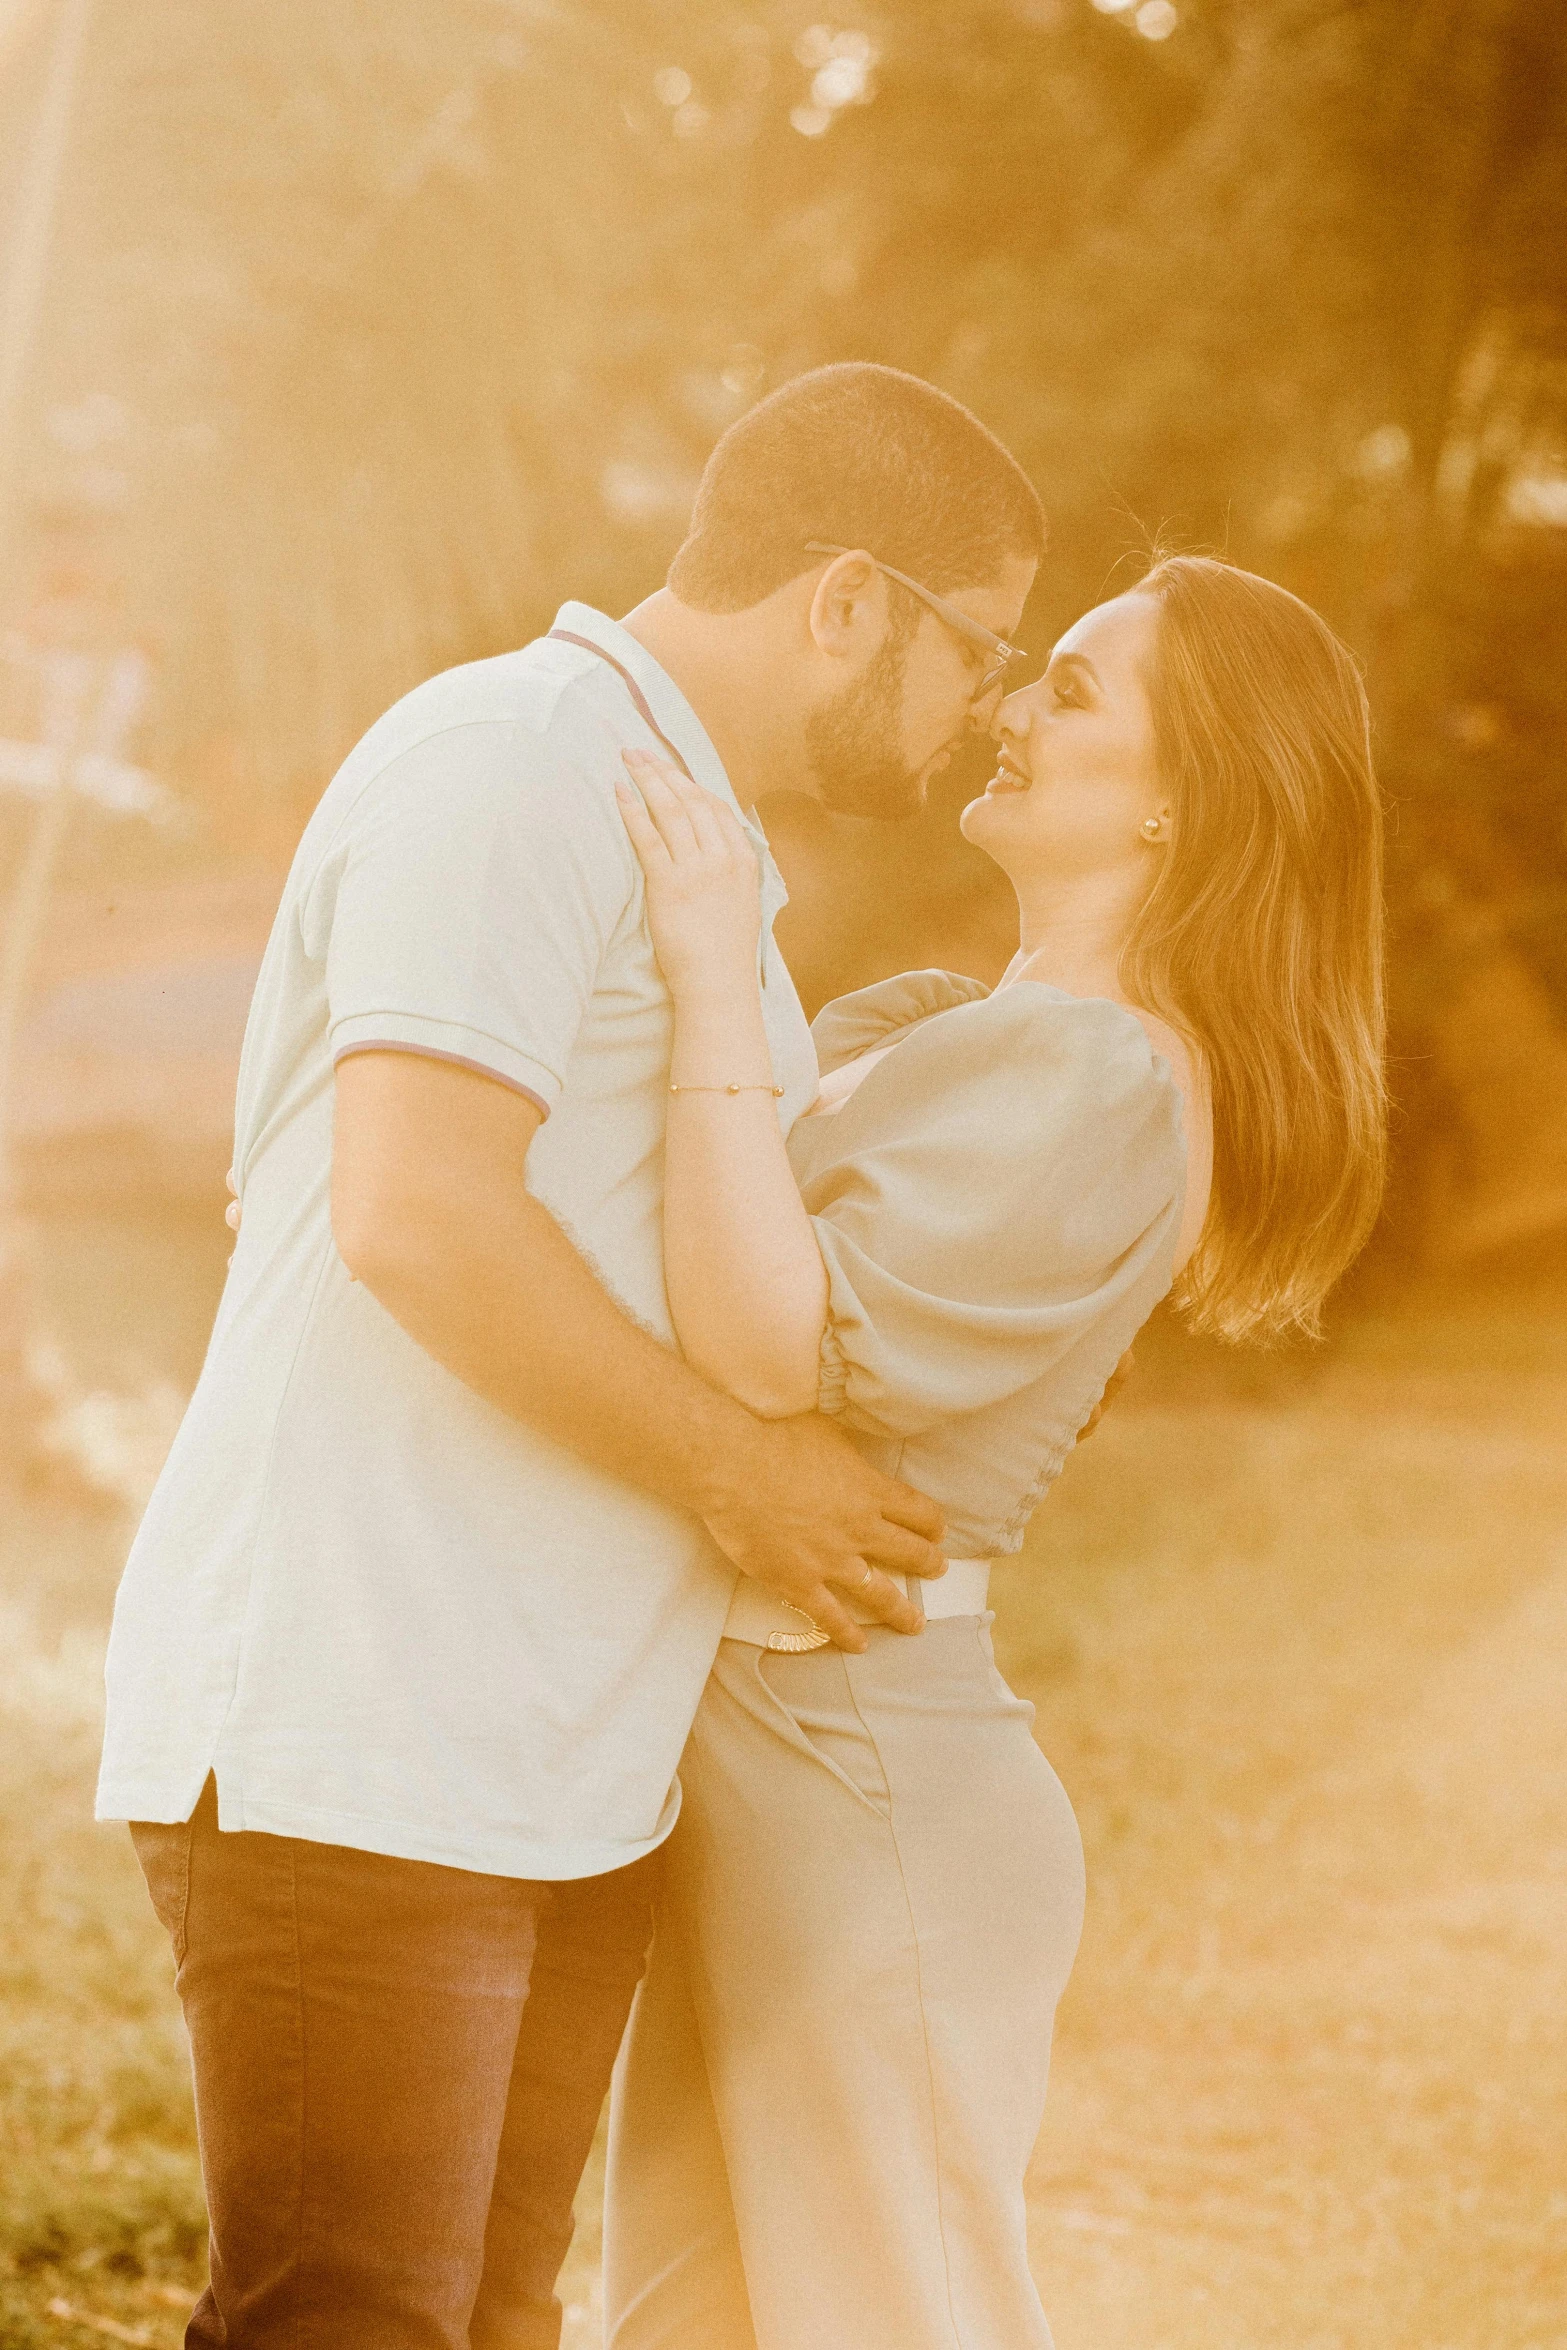 a man and a woman standing next to each other, a colorized photo, pexels contest winner, warm glow, hugging her knees, playful vibe, sunfaded